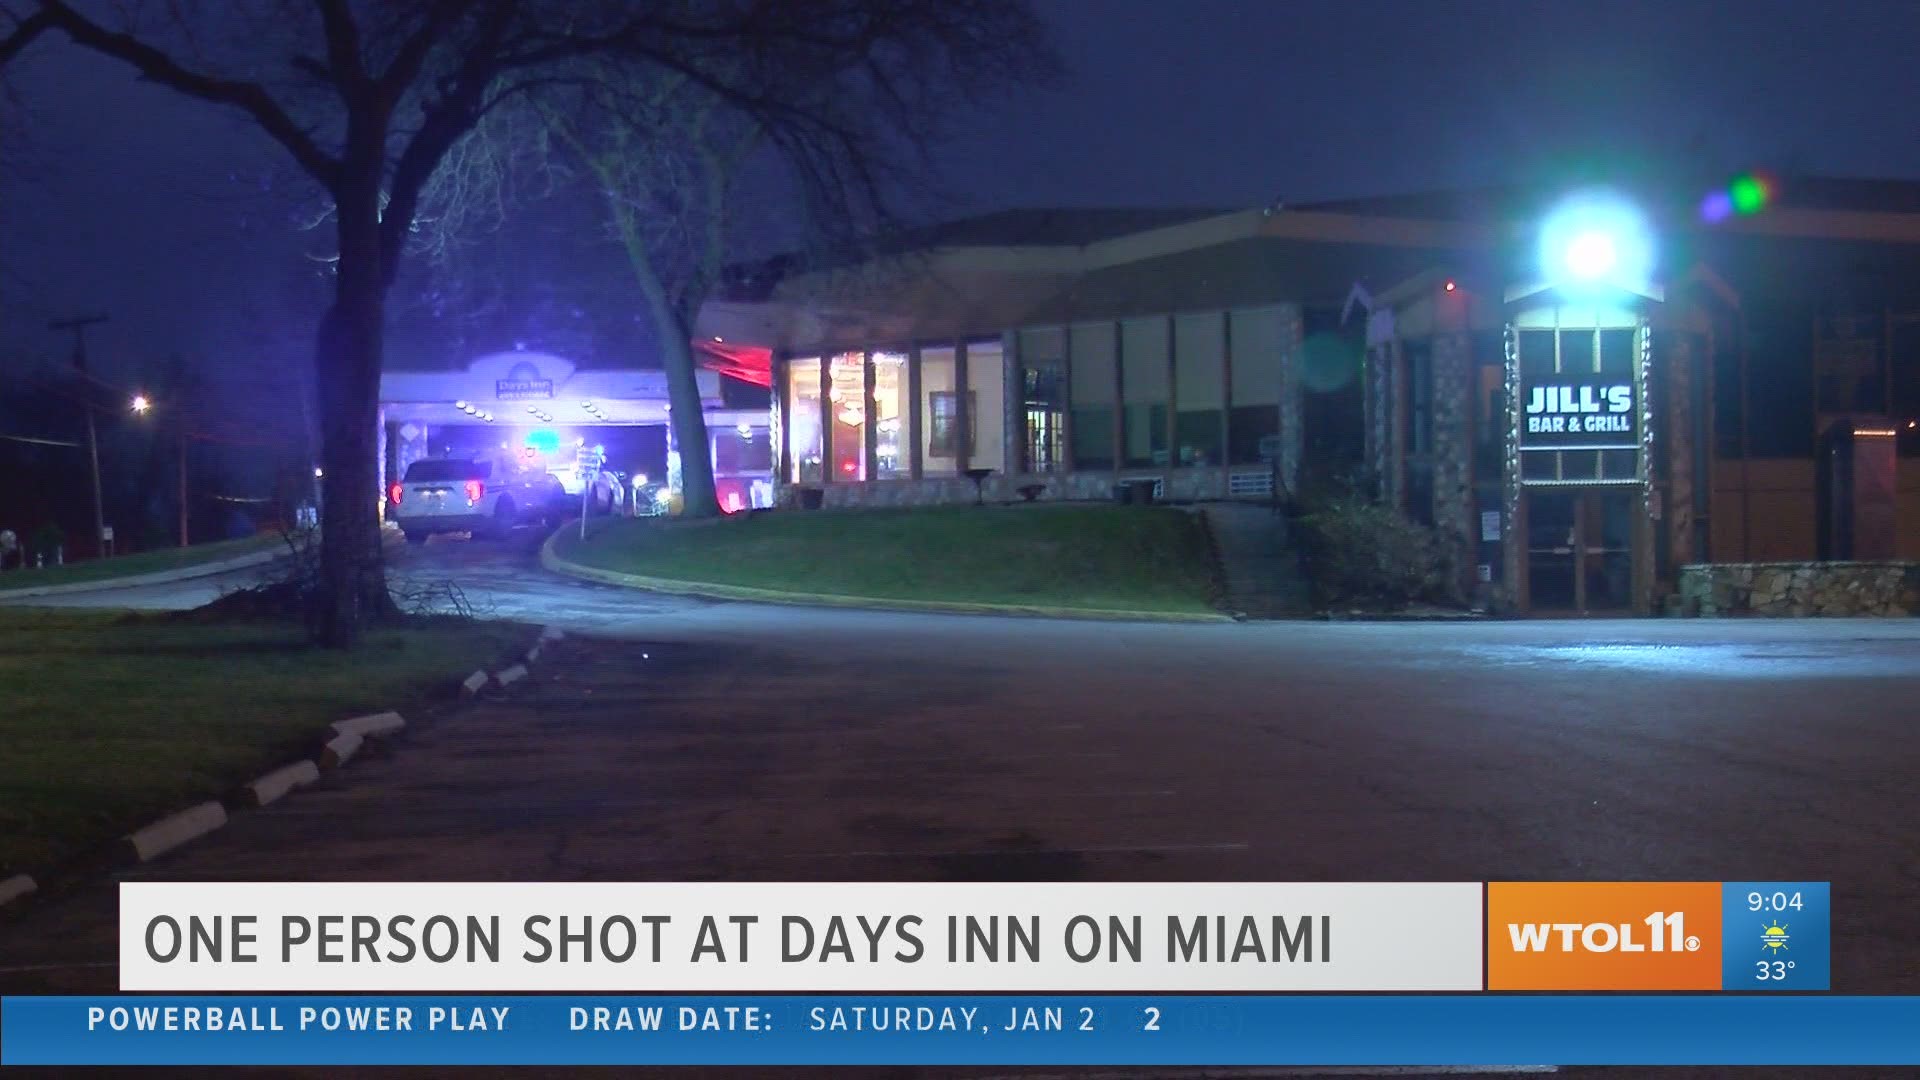 Police say one man was shot and taken to the hospital with non-life threatening injuries.